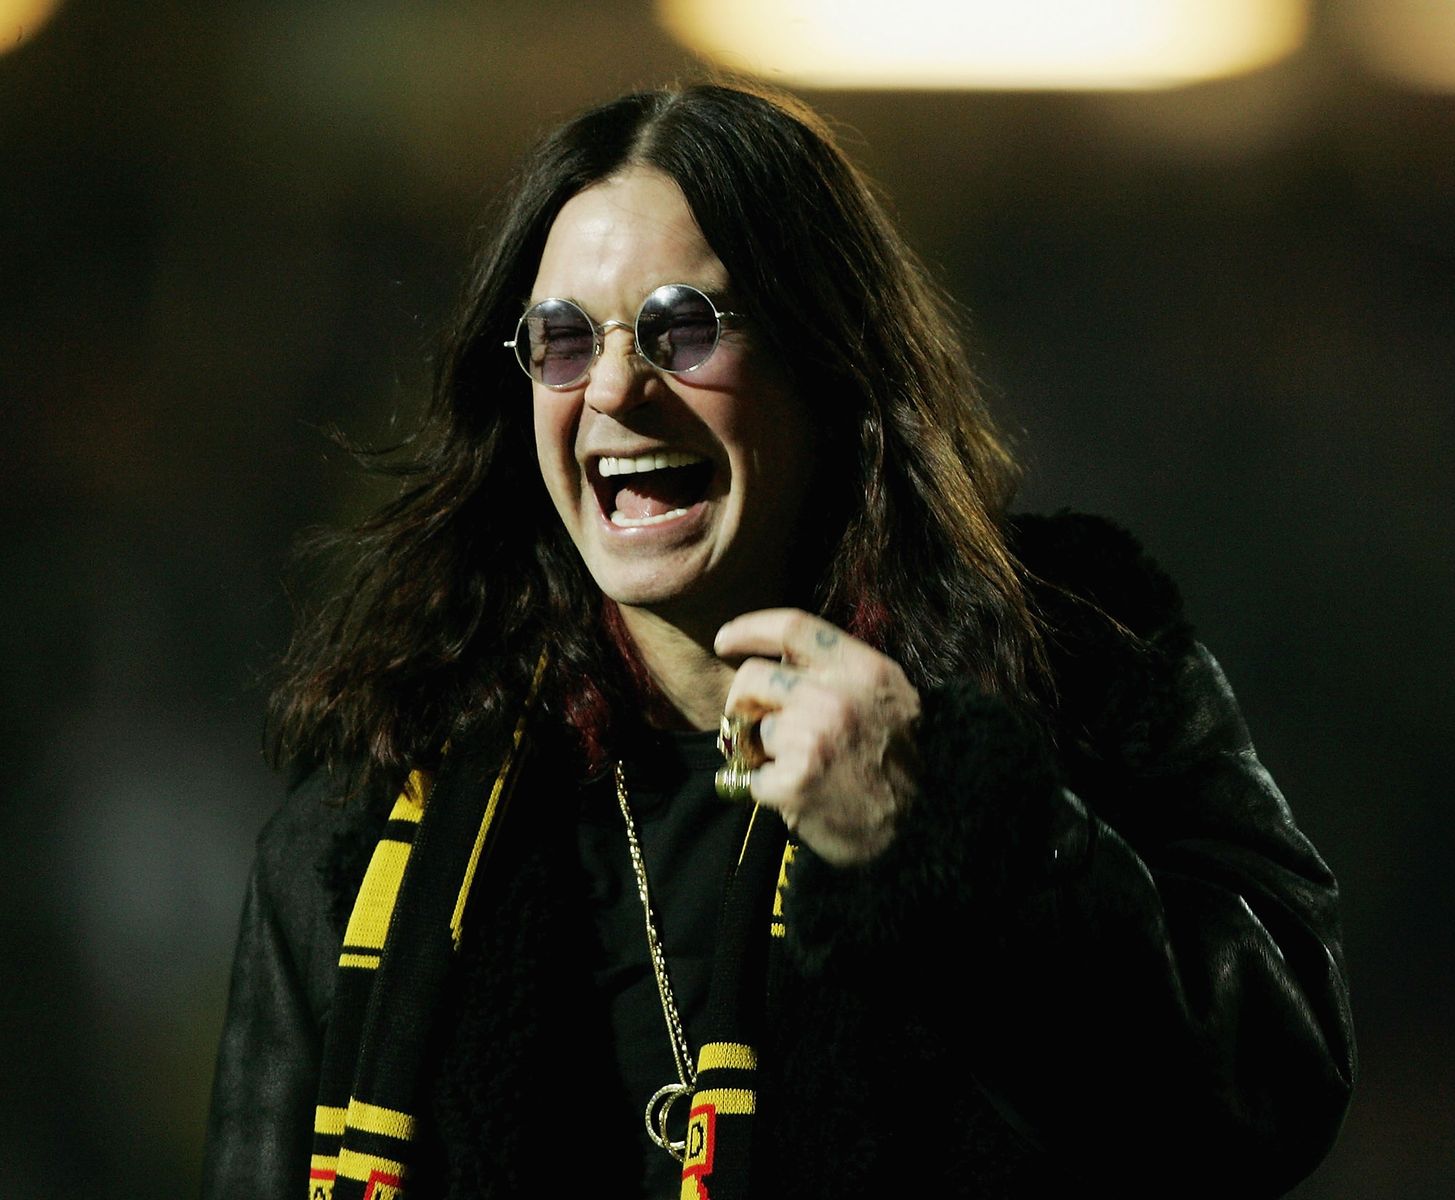 Ozzy Osbourne at the Carling Cup Quarterfinal match between Watford and Portsmouth on November 30, 2004, in Watford, England | Photo: Bryn Lennon/Getty Images